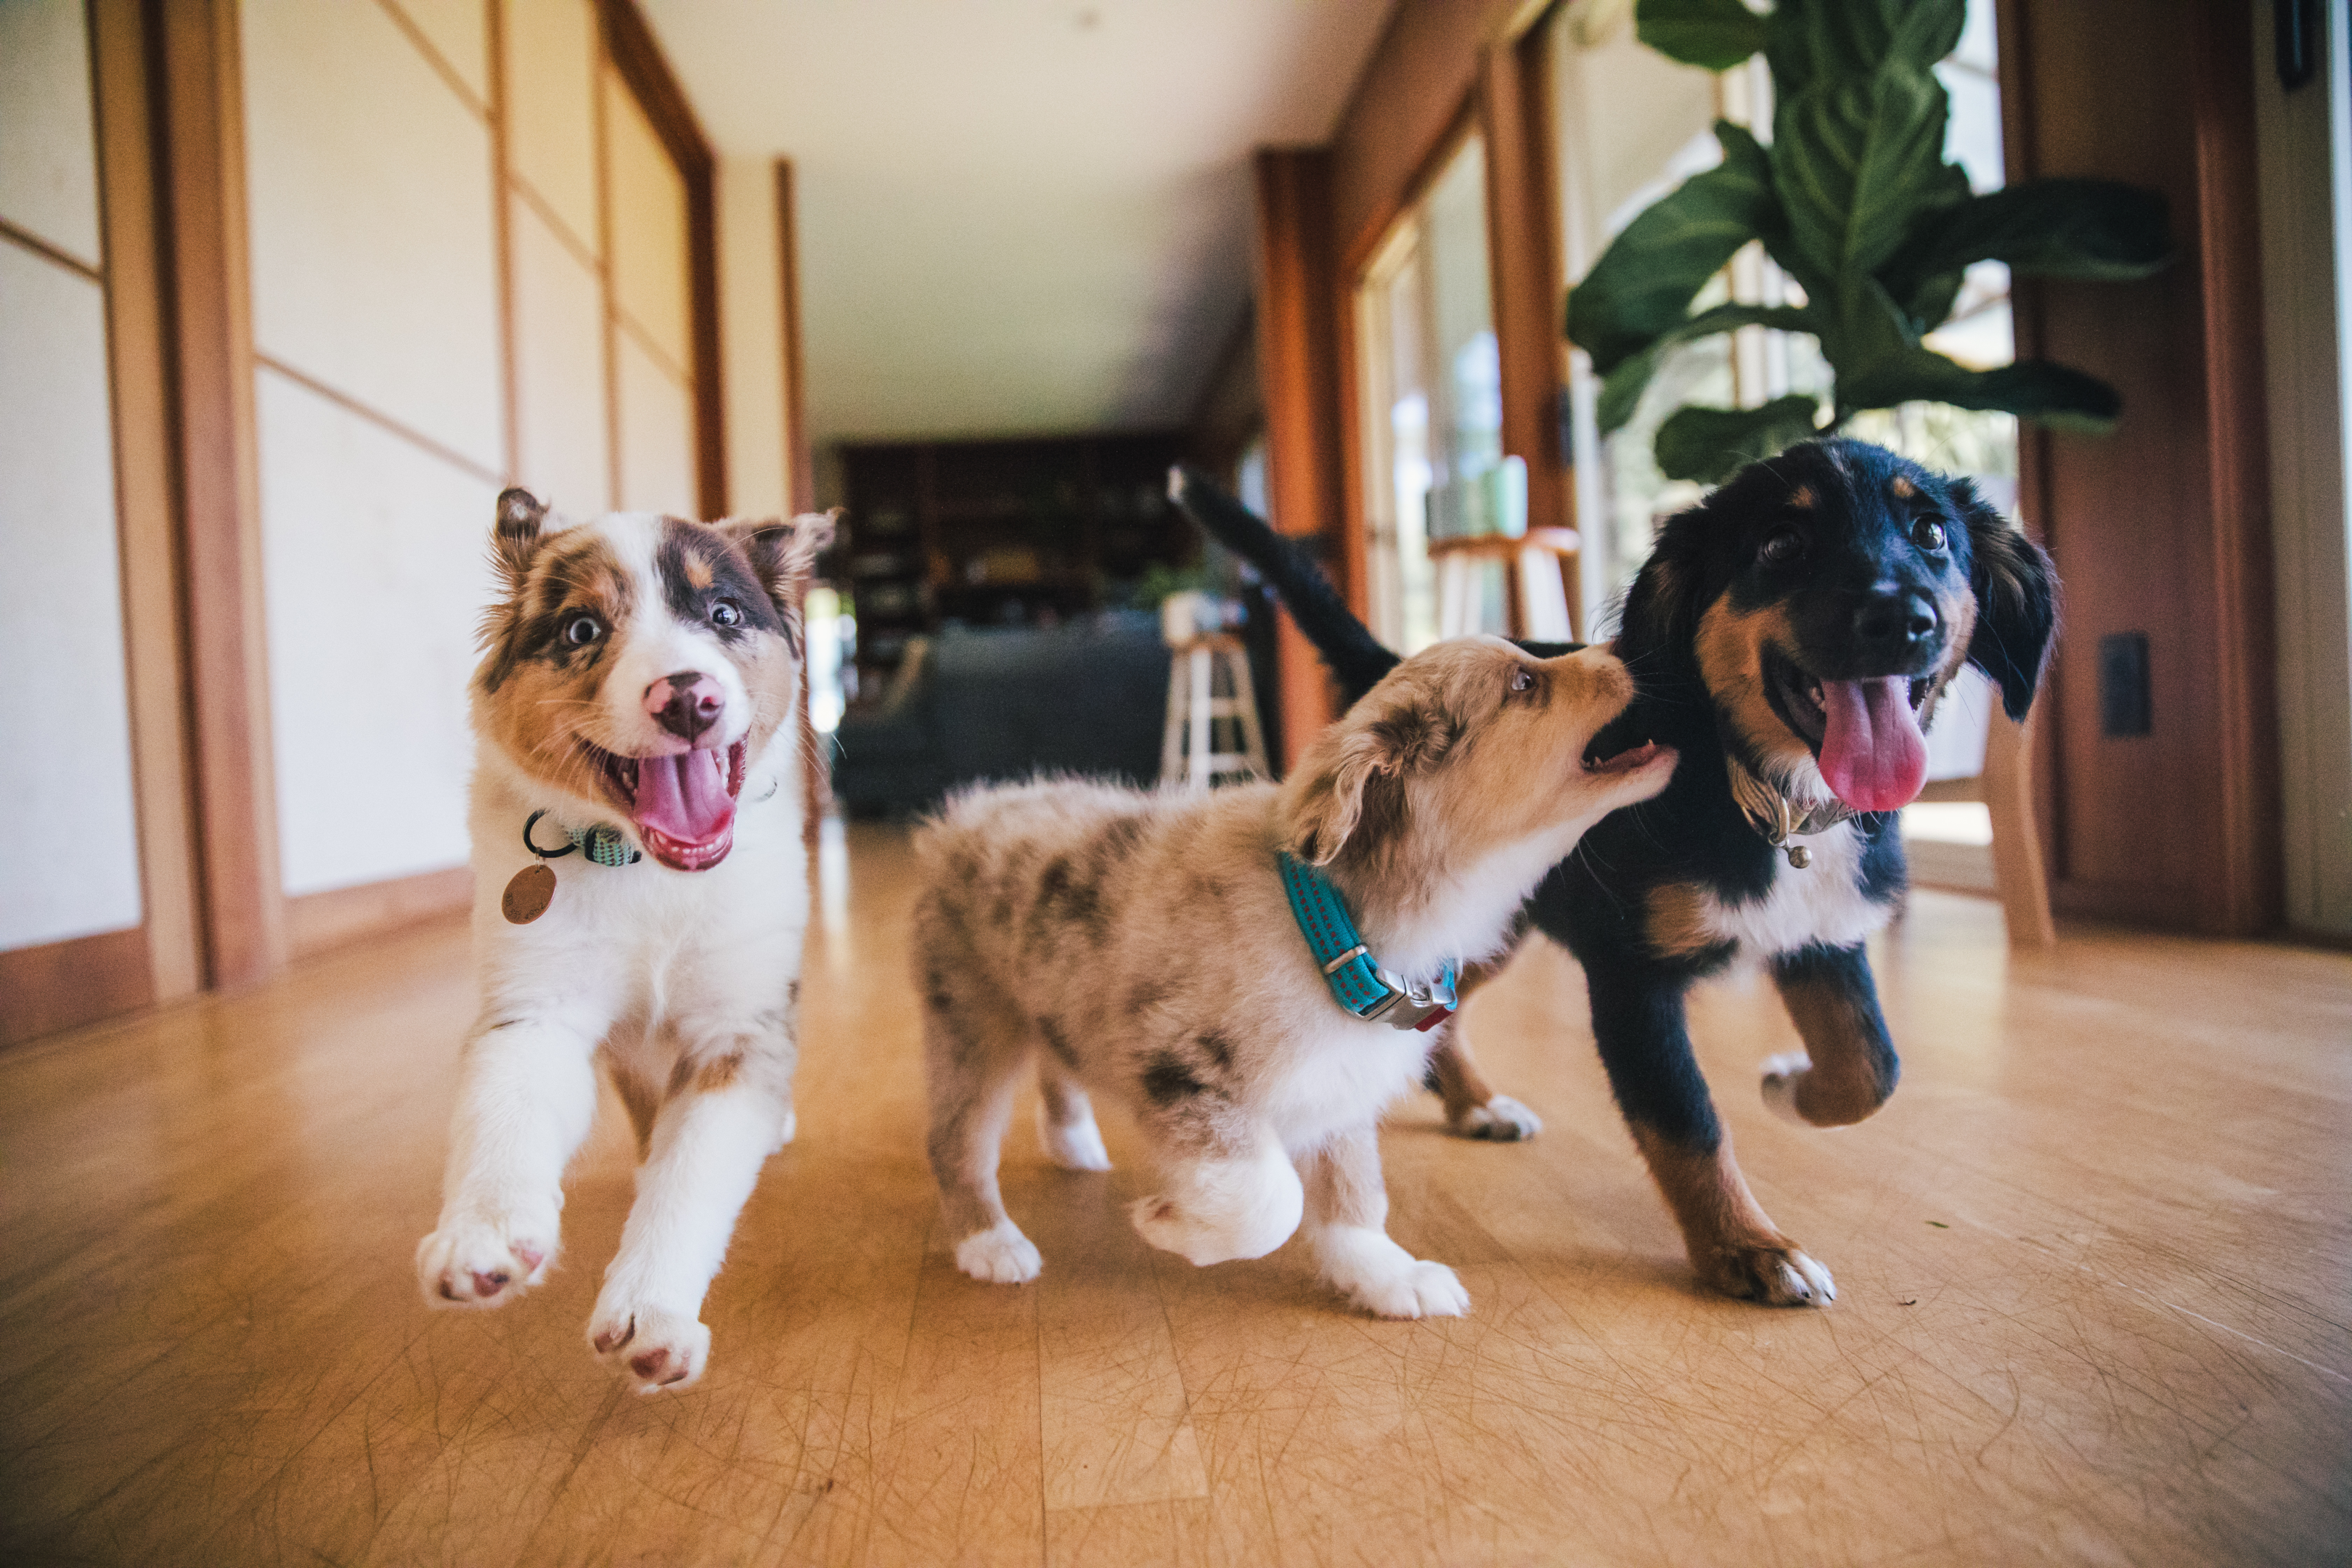 You want your puppy to play with other dogs, even before your puppy is fully vaccinated.